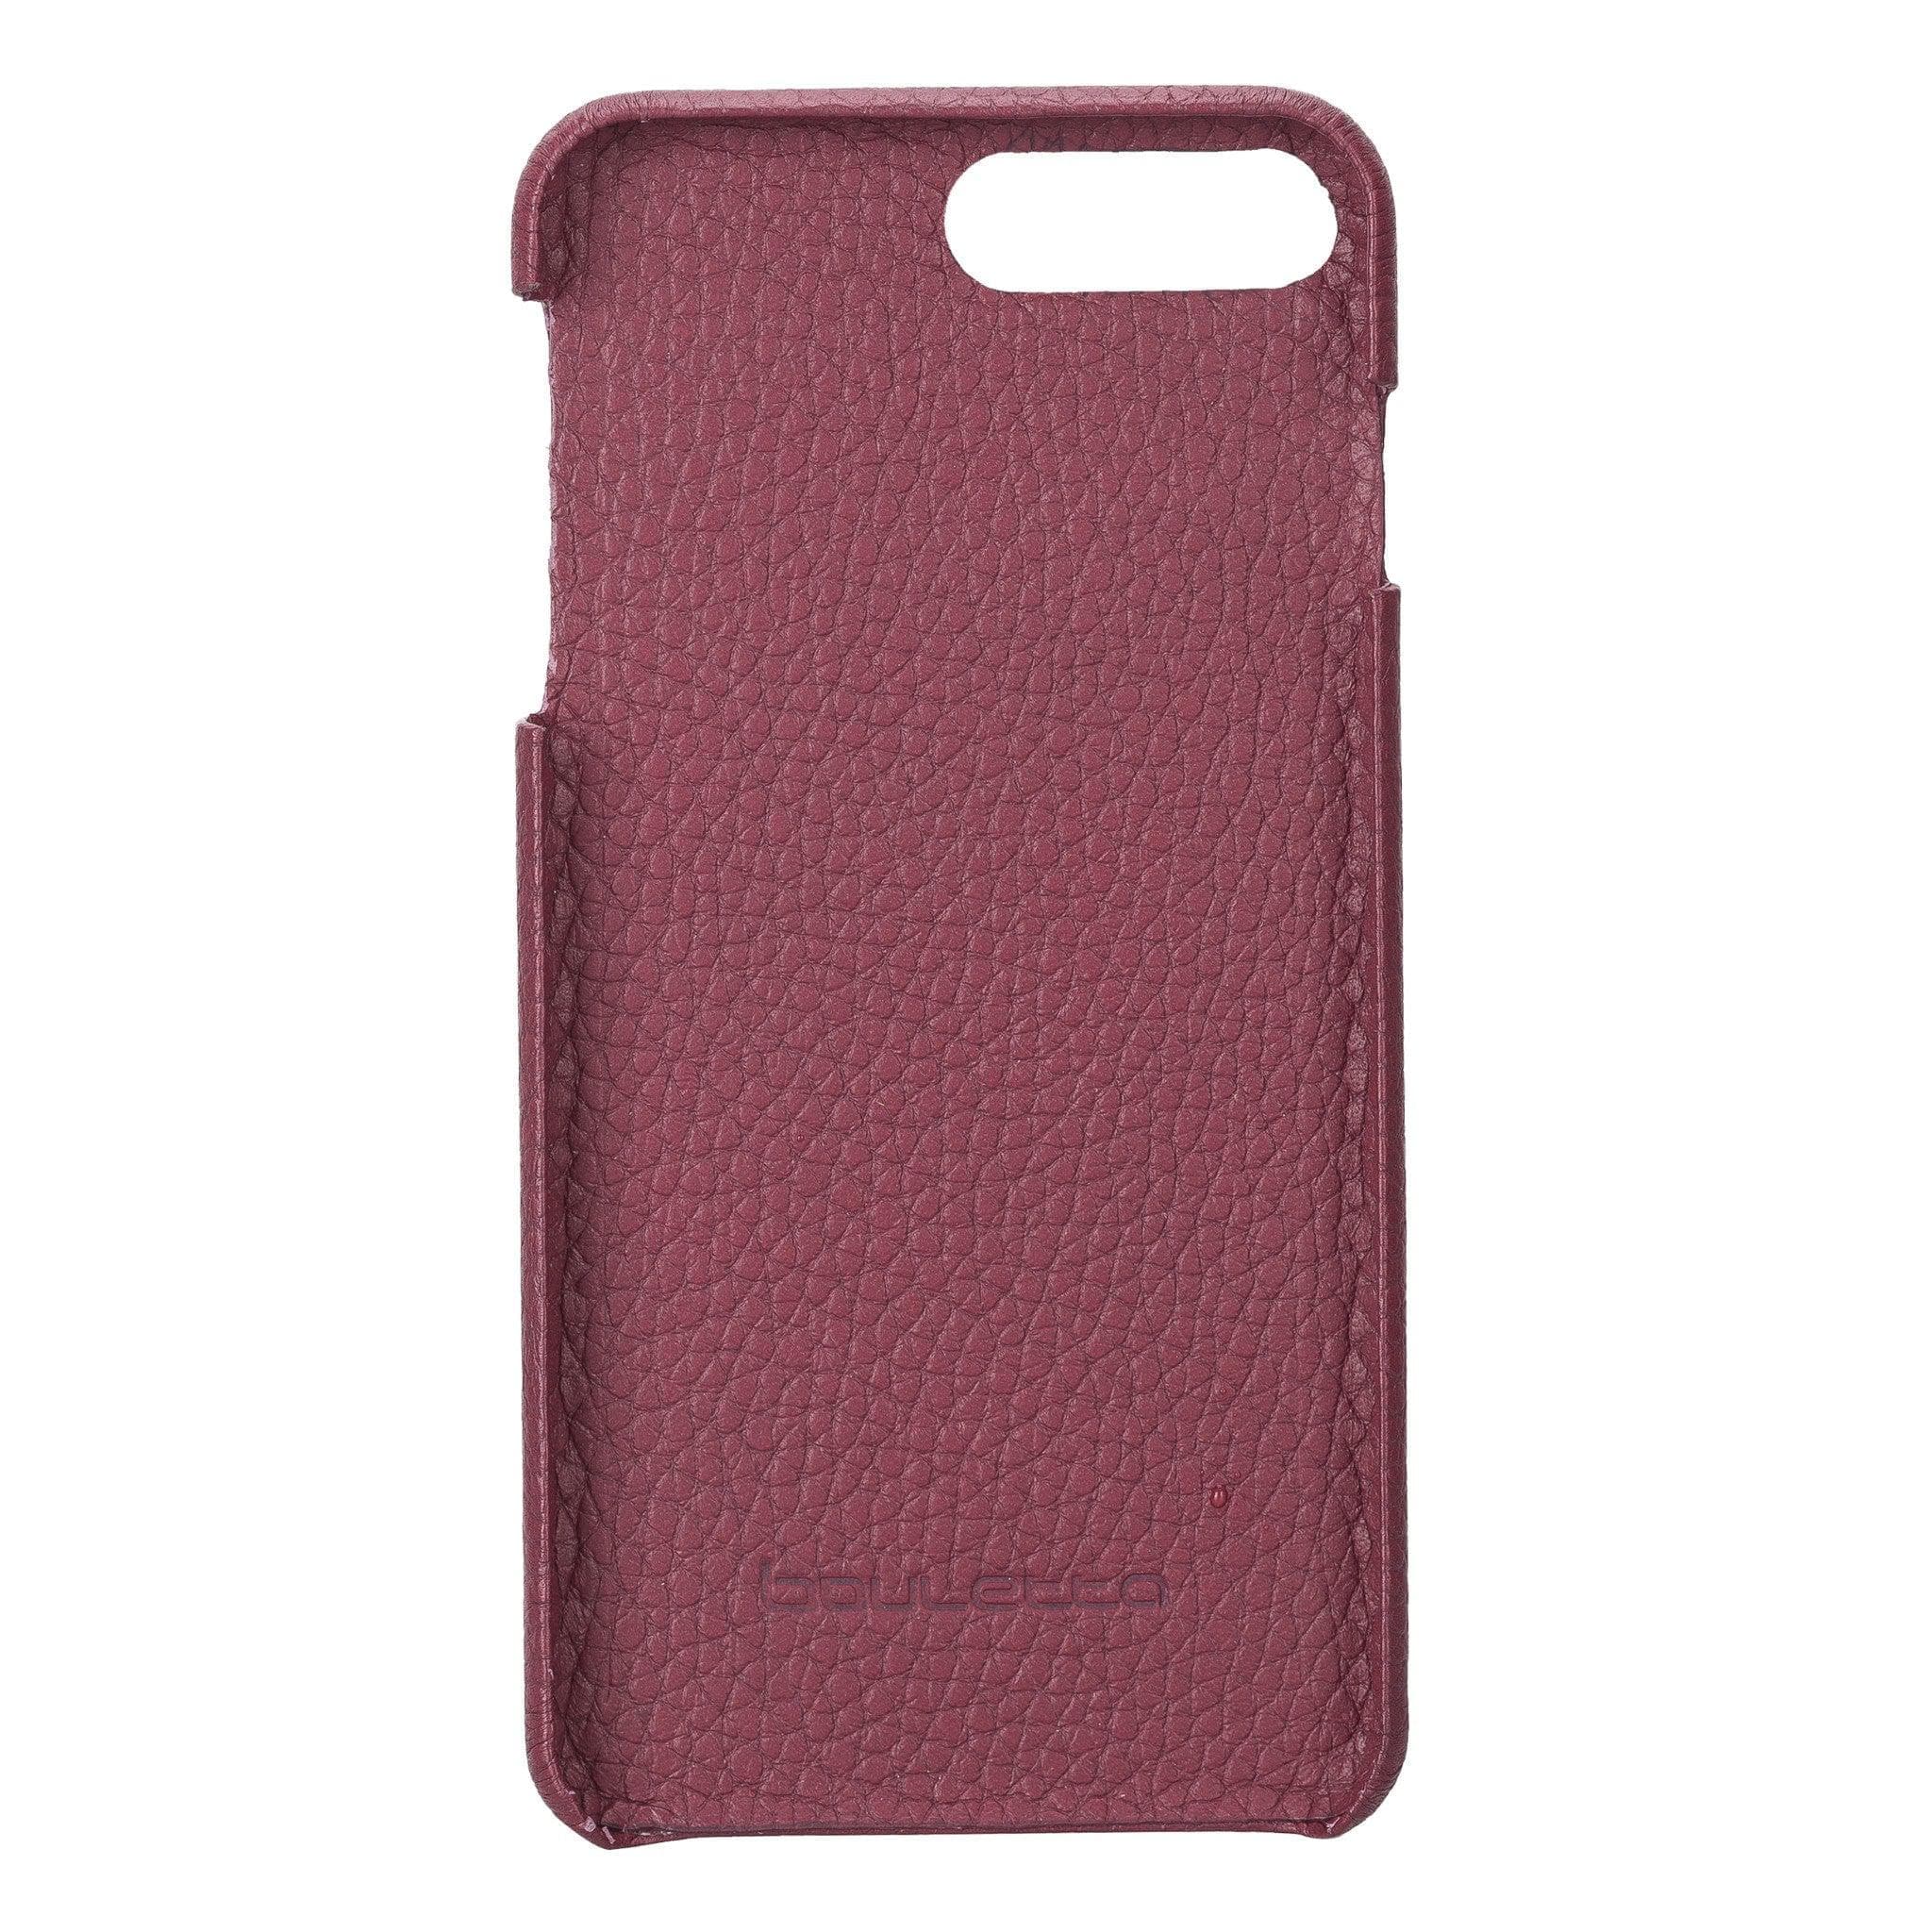 Apple iPhone SE Series Fully Covering Leather Back Cover Case Bouletta LTD